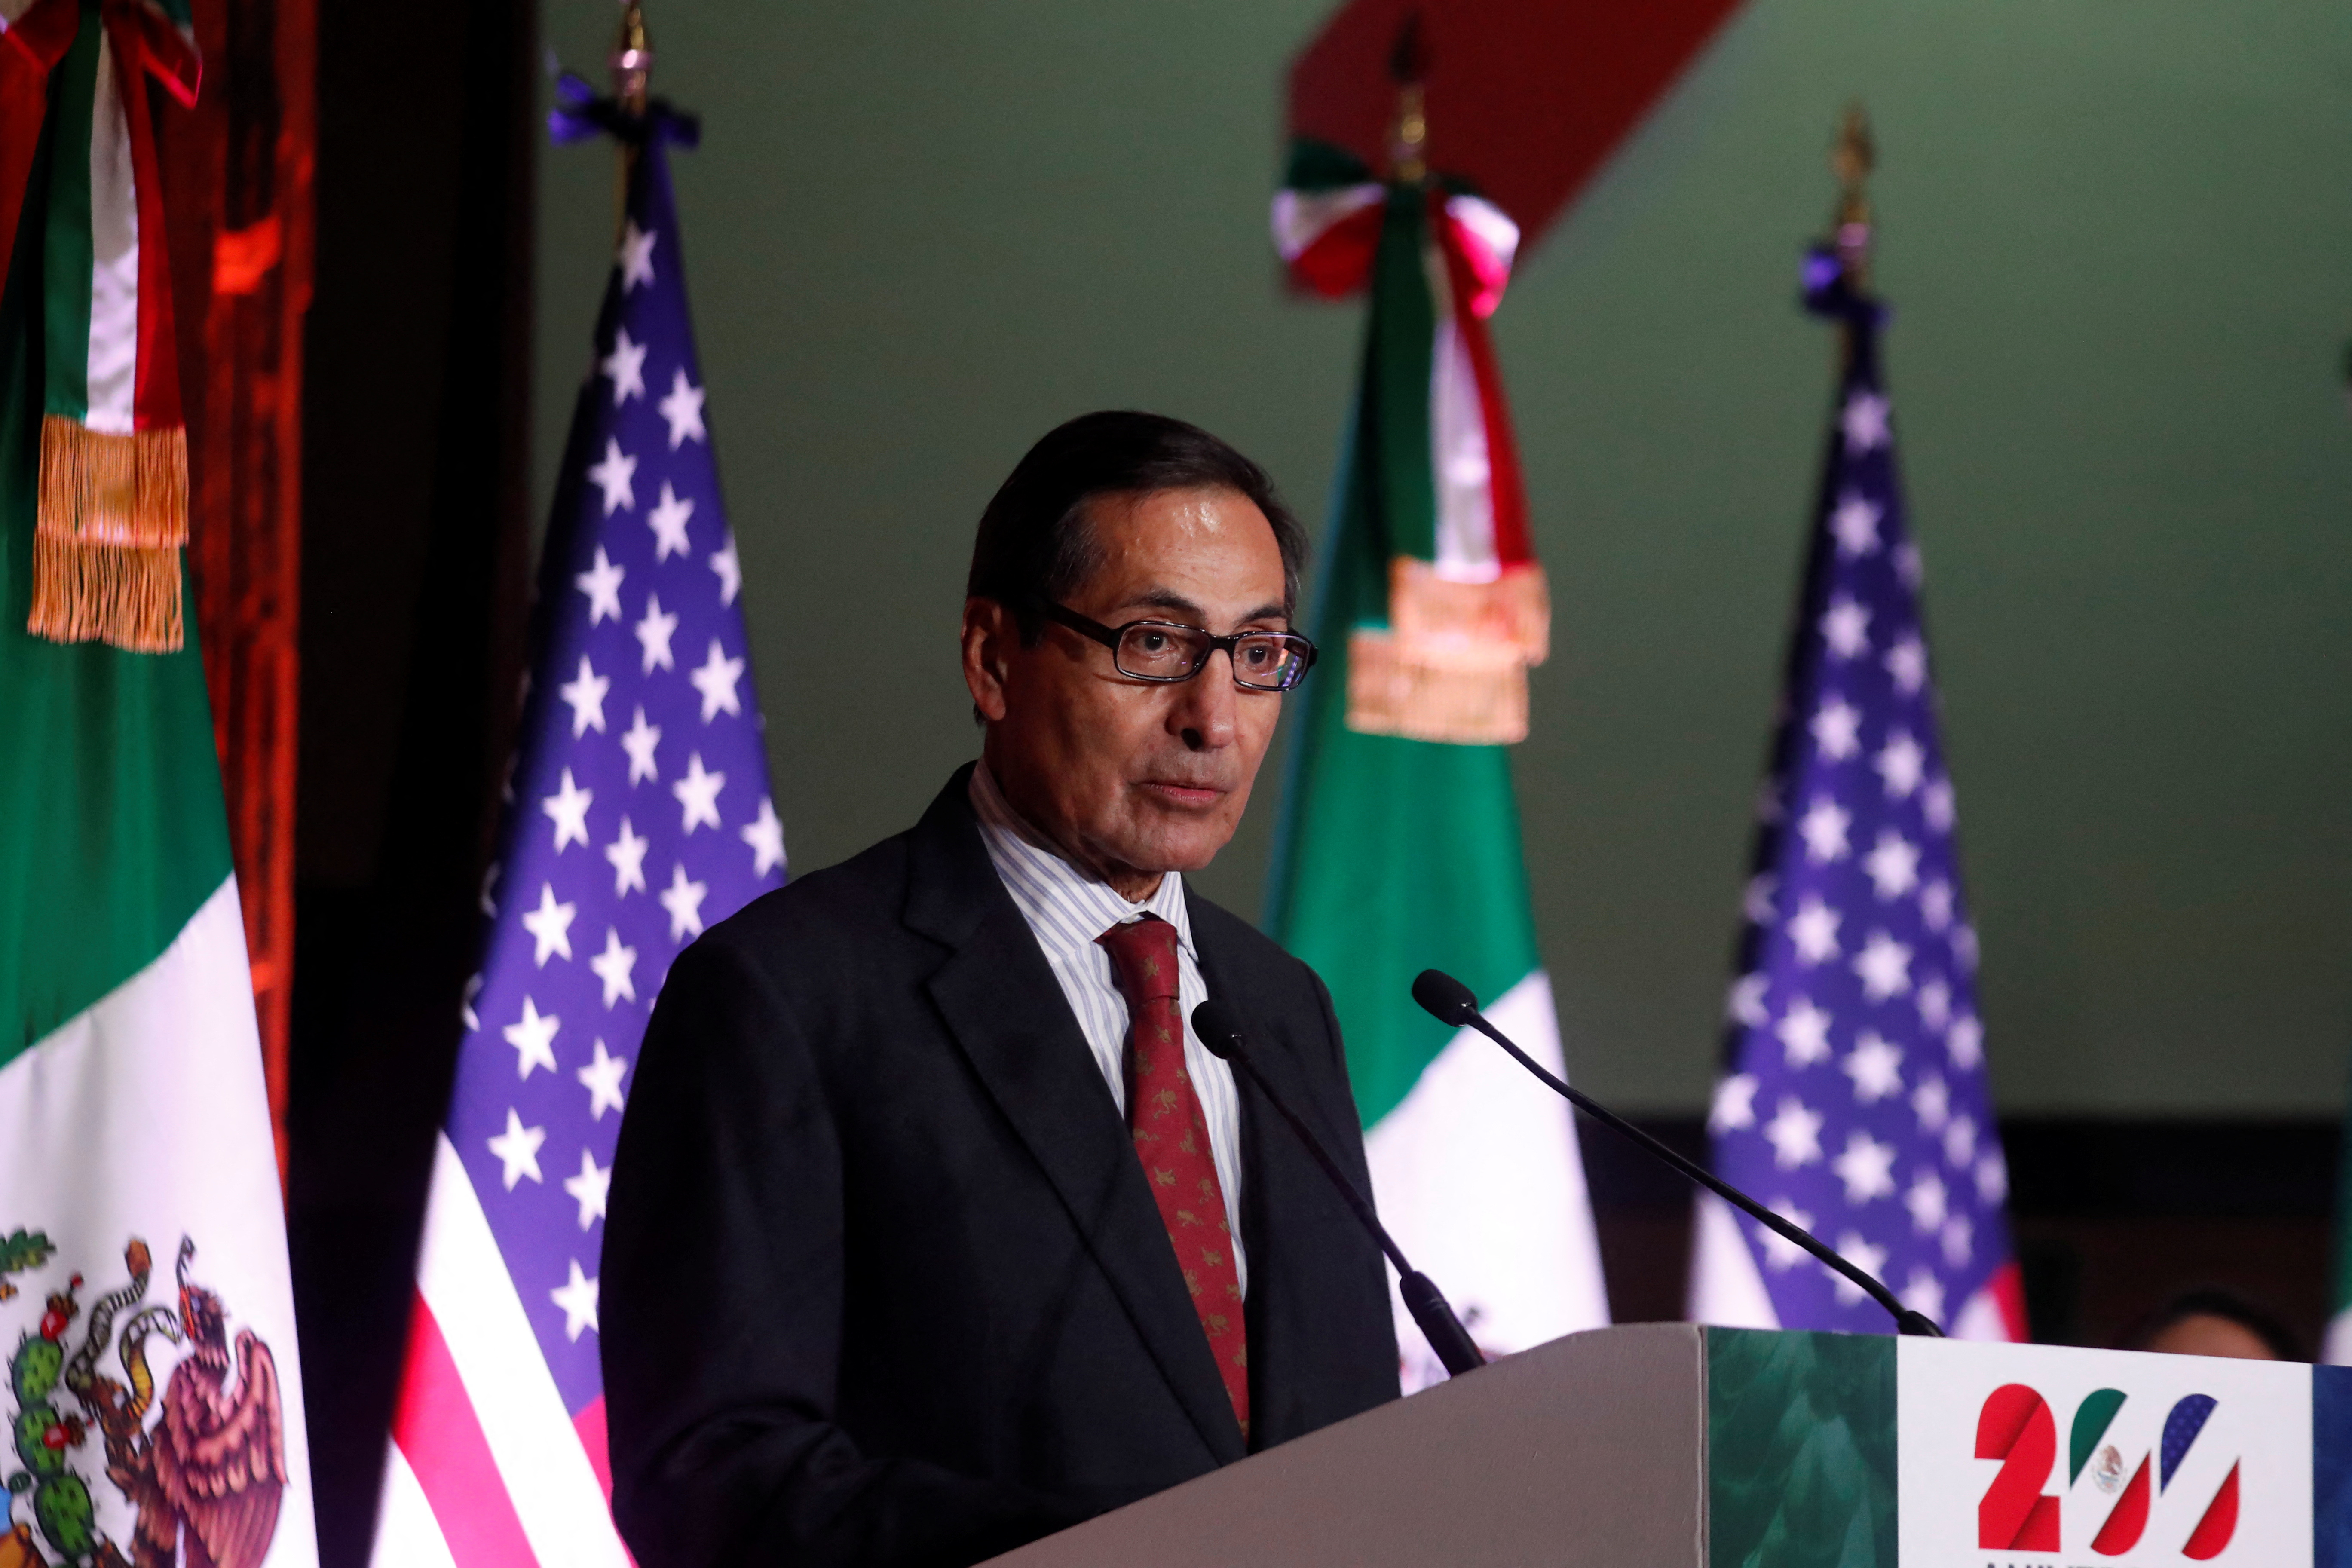 Mexico's Finance Minister Rogelio Ramirez de la O speaks at an event marking more than 200 years of diplomatic relations between the United States and Mexico, in Mexico City